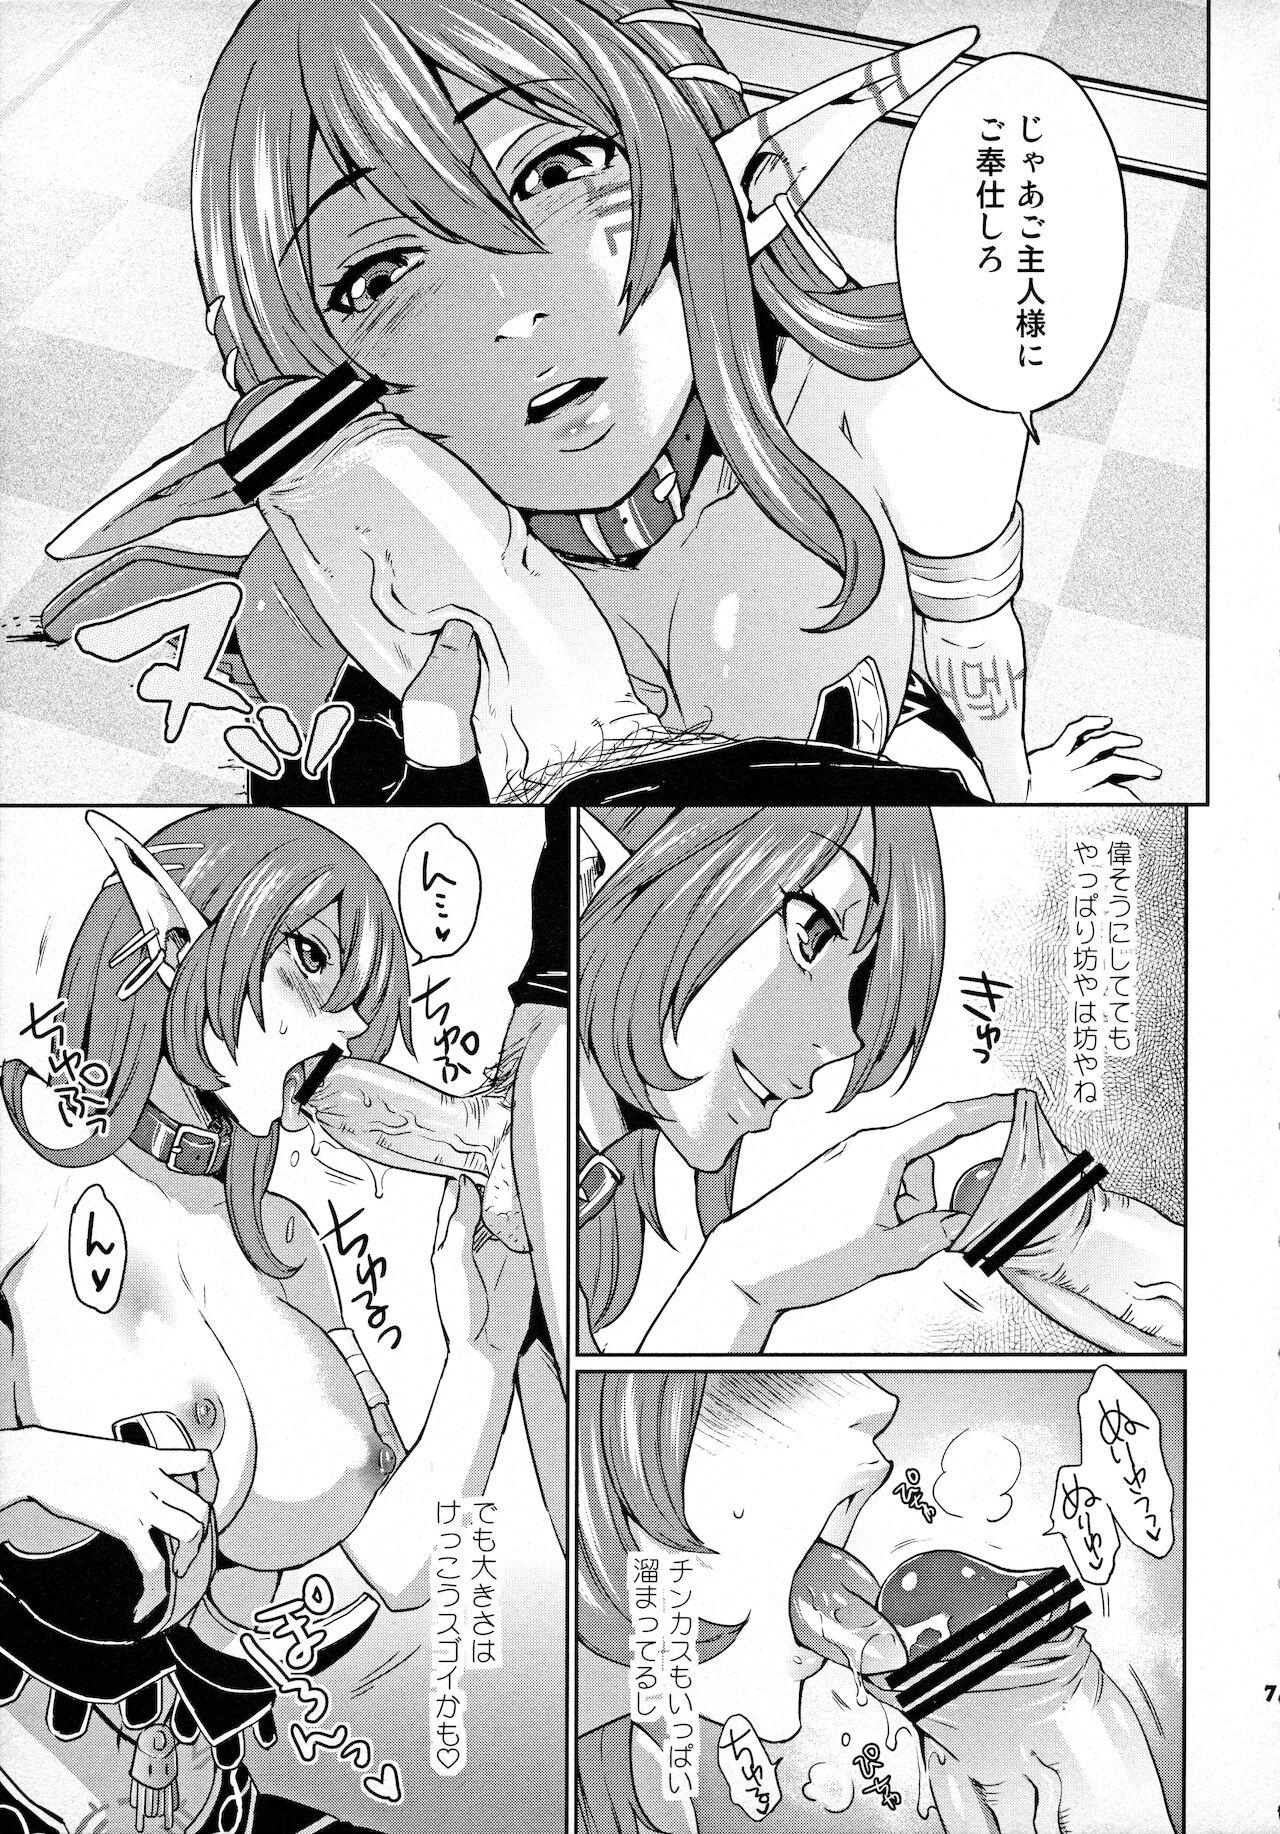 Woman Fucking Hoshi no Umi no Miboujin - The Widow of The Star Ocean - Star ocean 4 Eating Pussy - Page 6